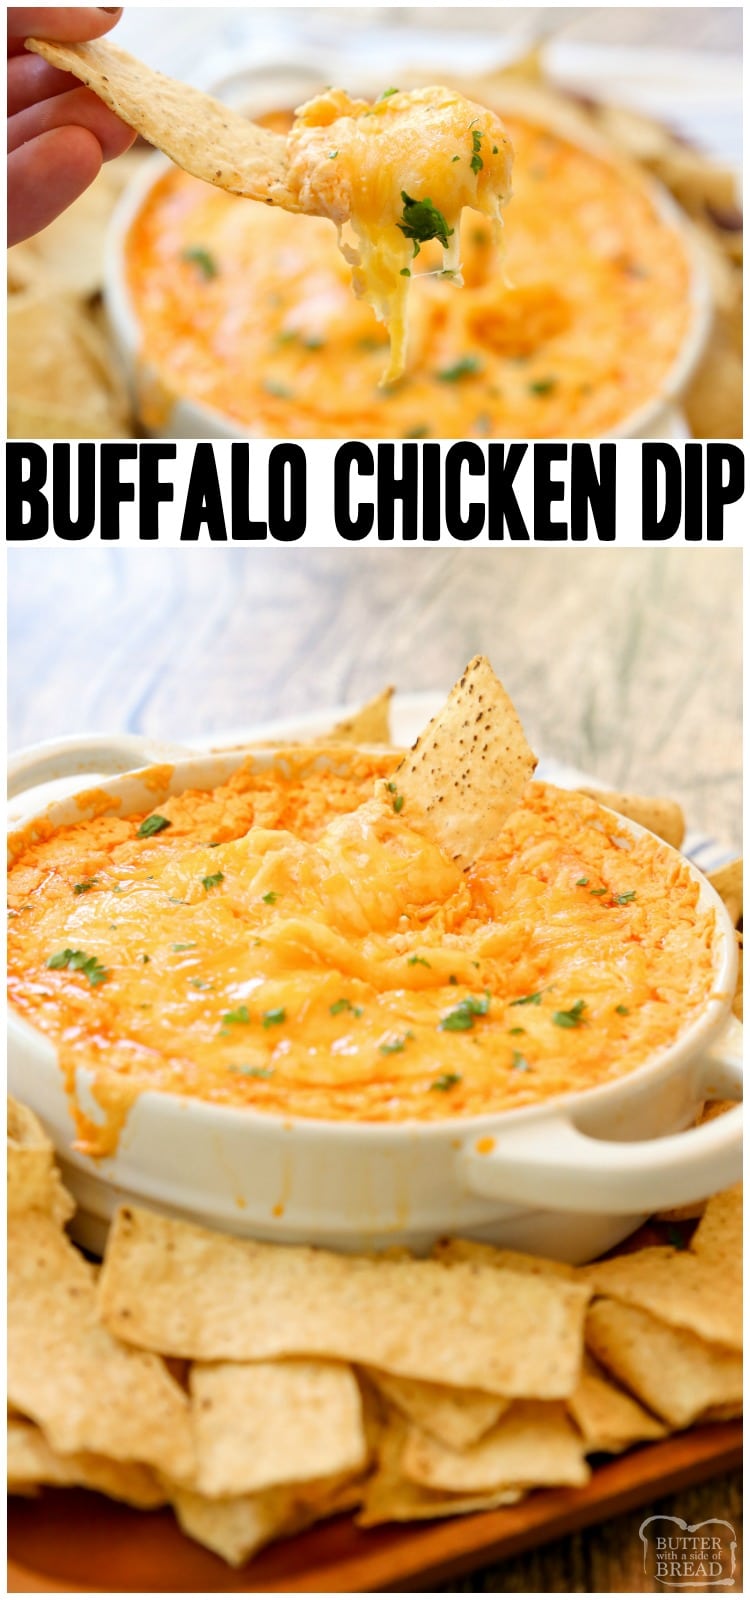 Easy Buffalo Chicken Dip Recipe made with 3 cheeses, juicy chicken and a flavorful Buffalo sauce makes an awesome chicken wing dip with a bit of a kick. Easy Buffalo Chicken Dip is an easy appetizer perfect for game day. #easybuffalochickendip #buffalochickendip #buffalosauce #chickenwingdip #buffalochickenrecipe #buffalochicken #spicychicken #chickendip #easyappetizer #recipefrom Butter With a Side of Bread